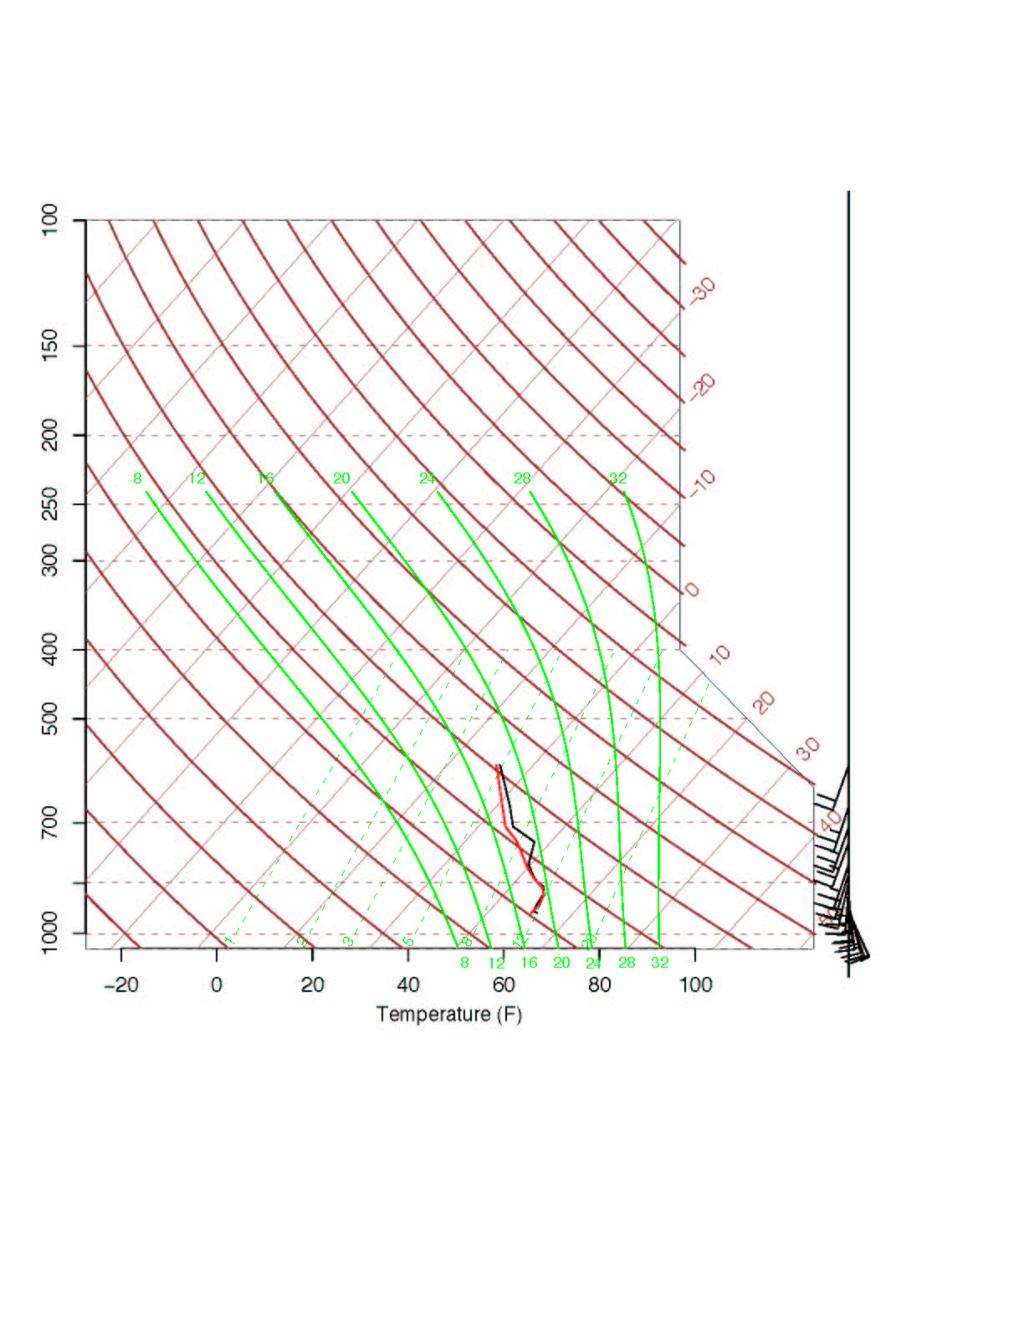 14 levels from the surface to 4000 m, and a comparison of its output with the KENX VAD wind profile and the ALB 0000 UT sounding indicated general agreement. The East Jewett sounding (Fig.